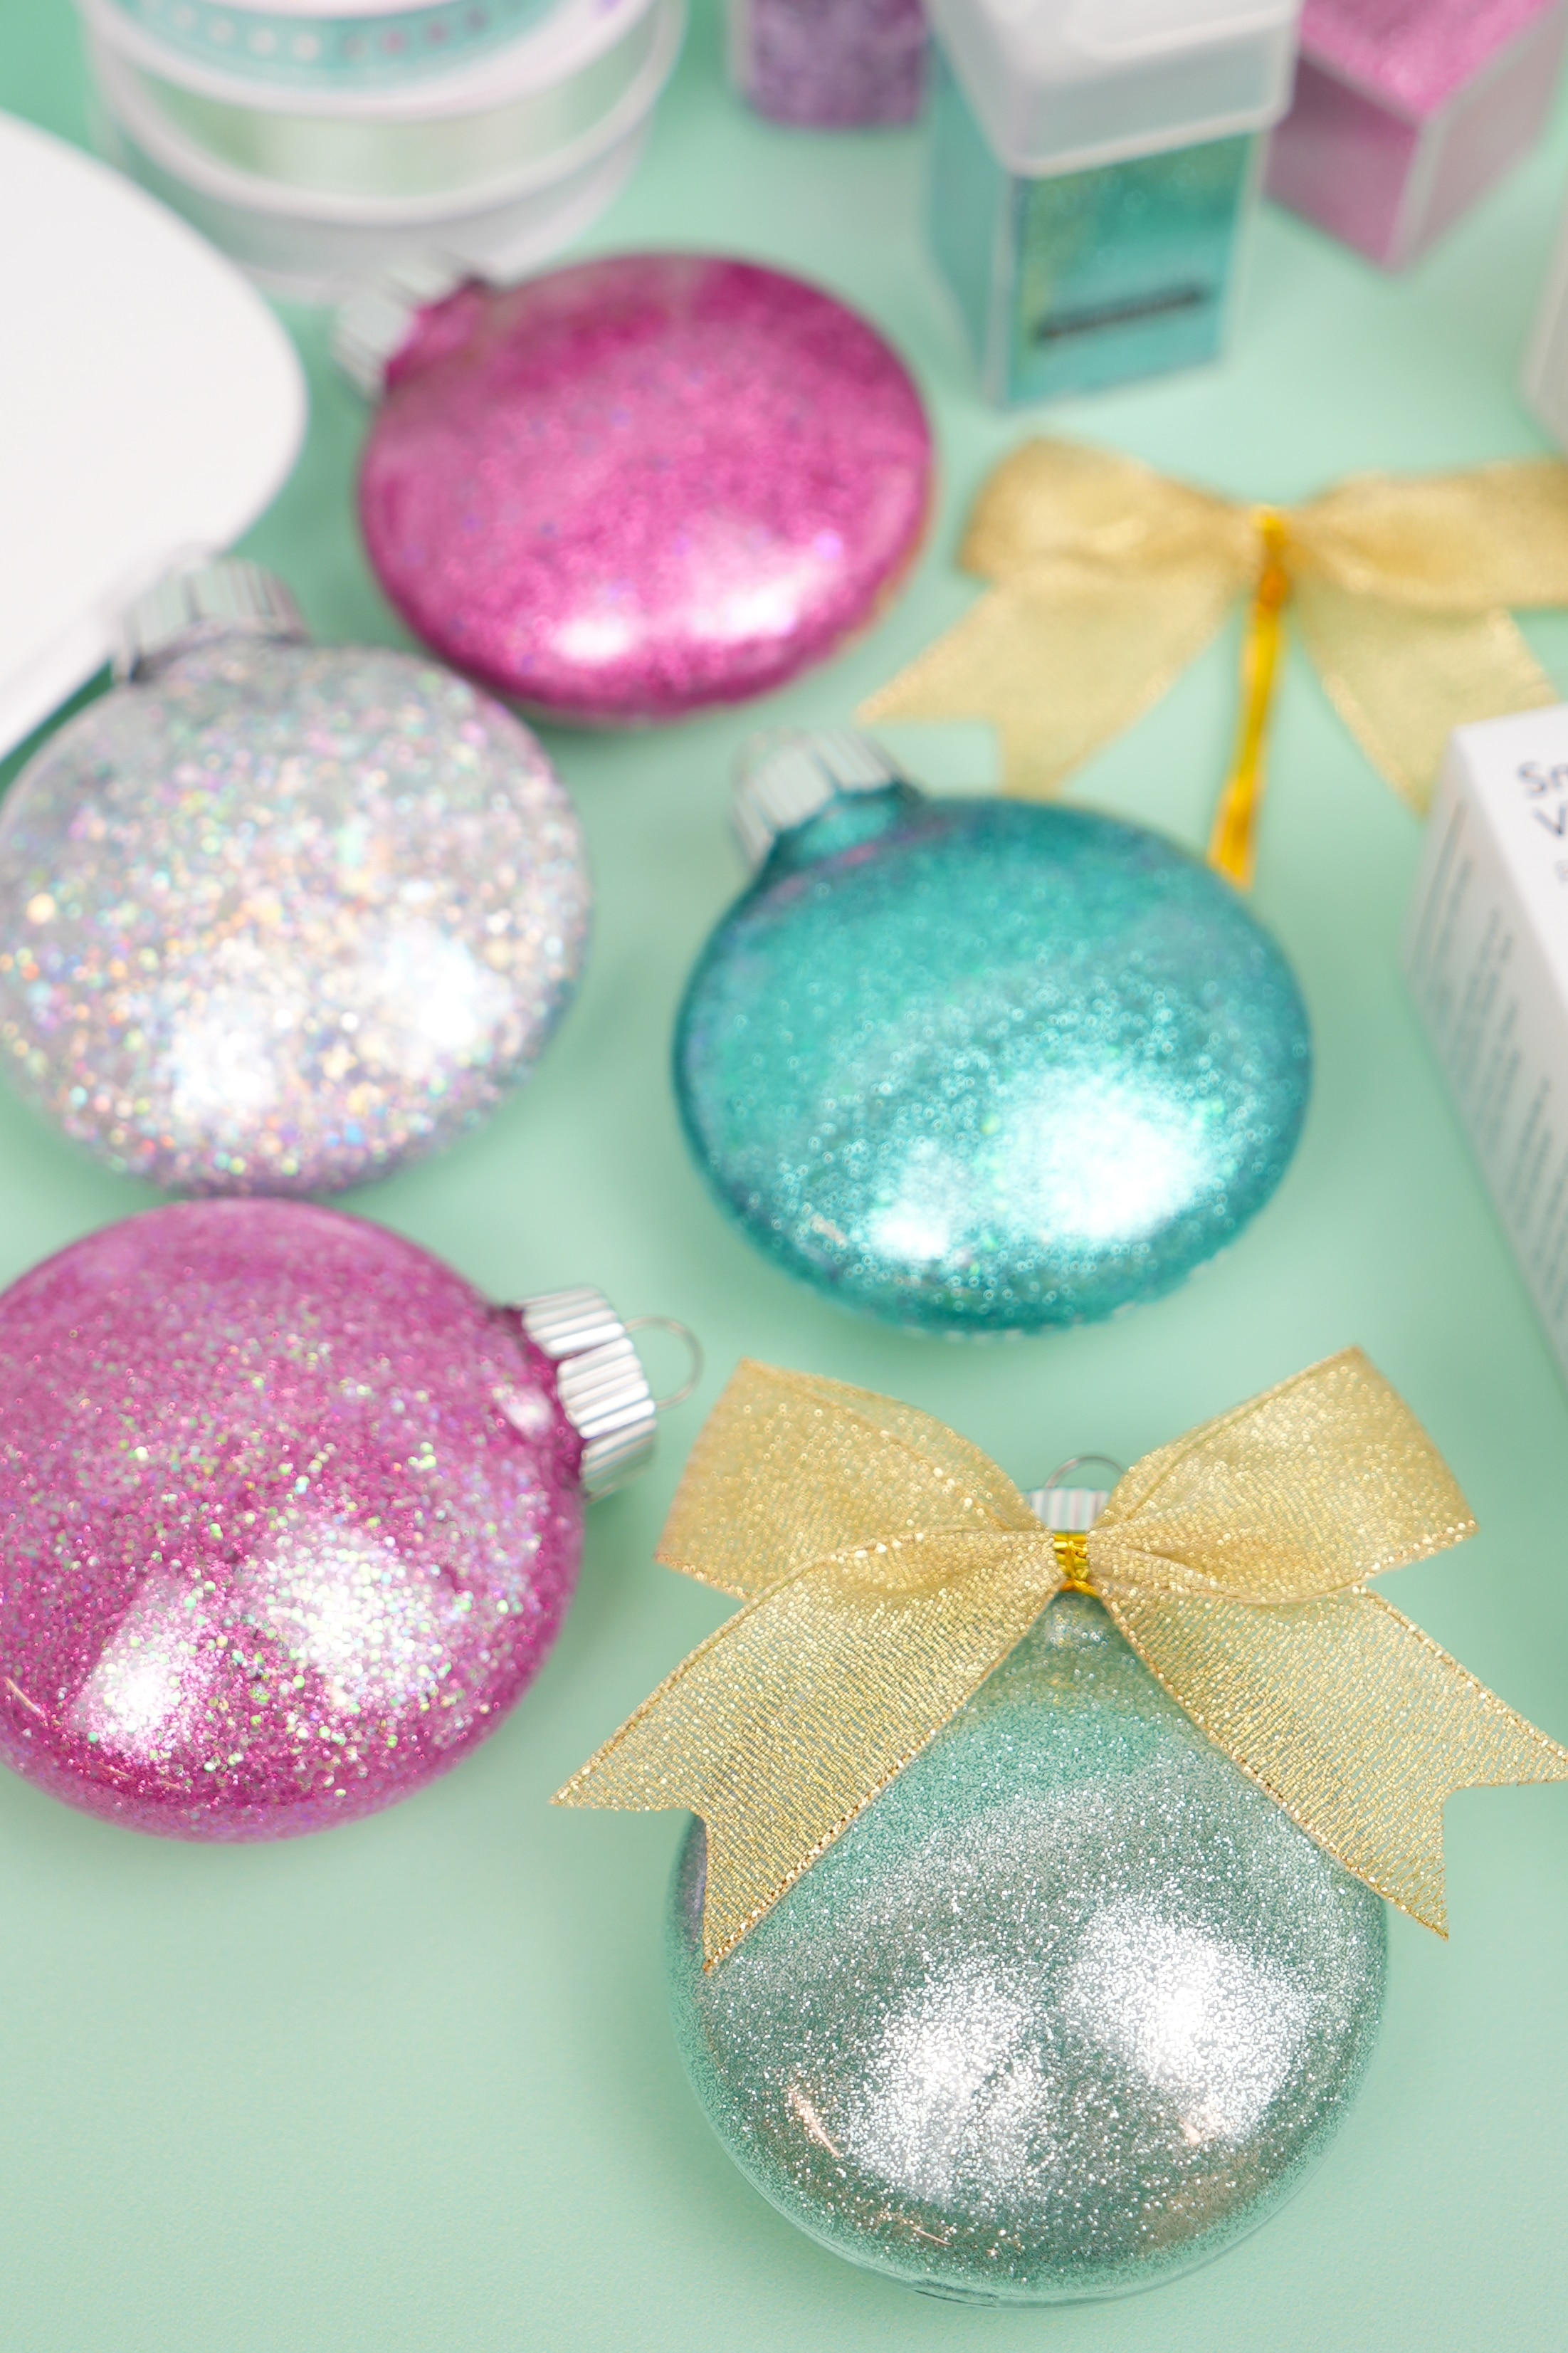 https://www.happinessishomemade.net/wp-content/uploads/2021/12/How-to-Make-DIY-Glitter-Ornaments-with-Bows.jpg